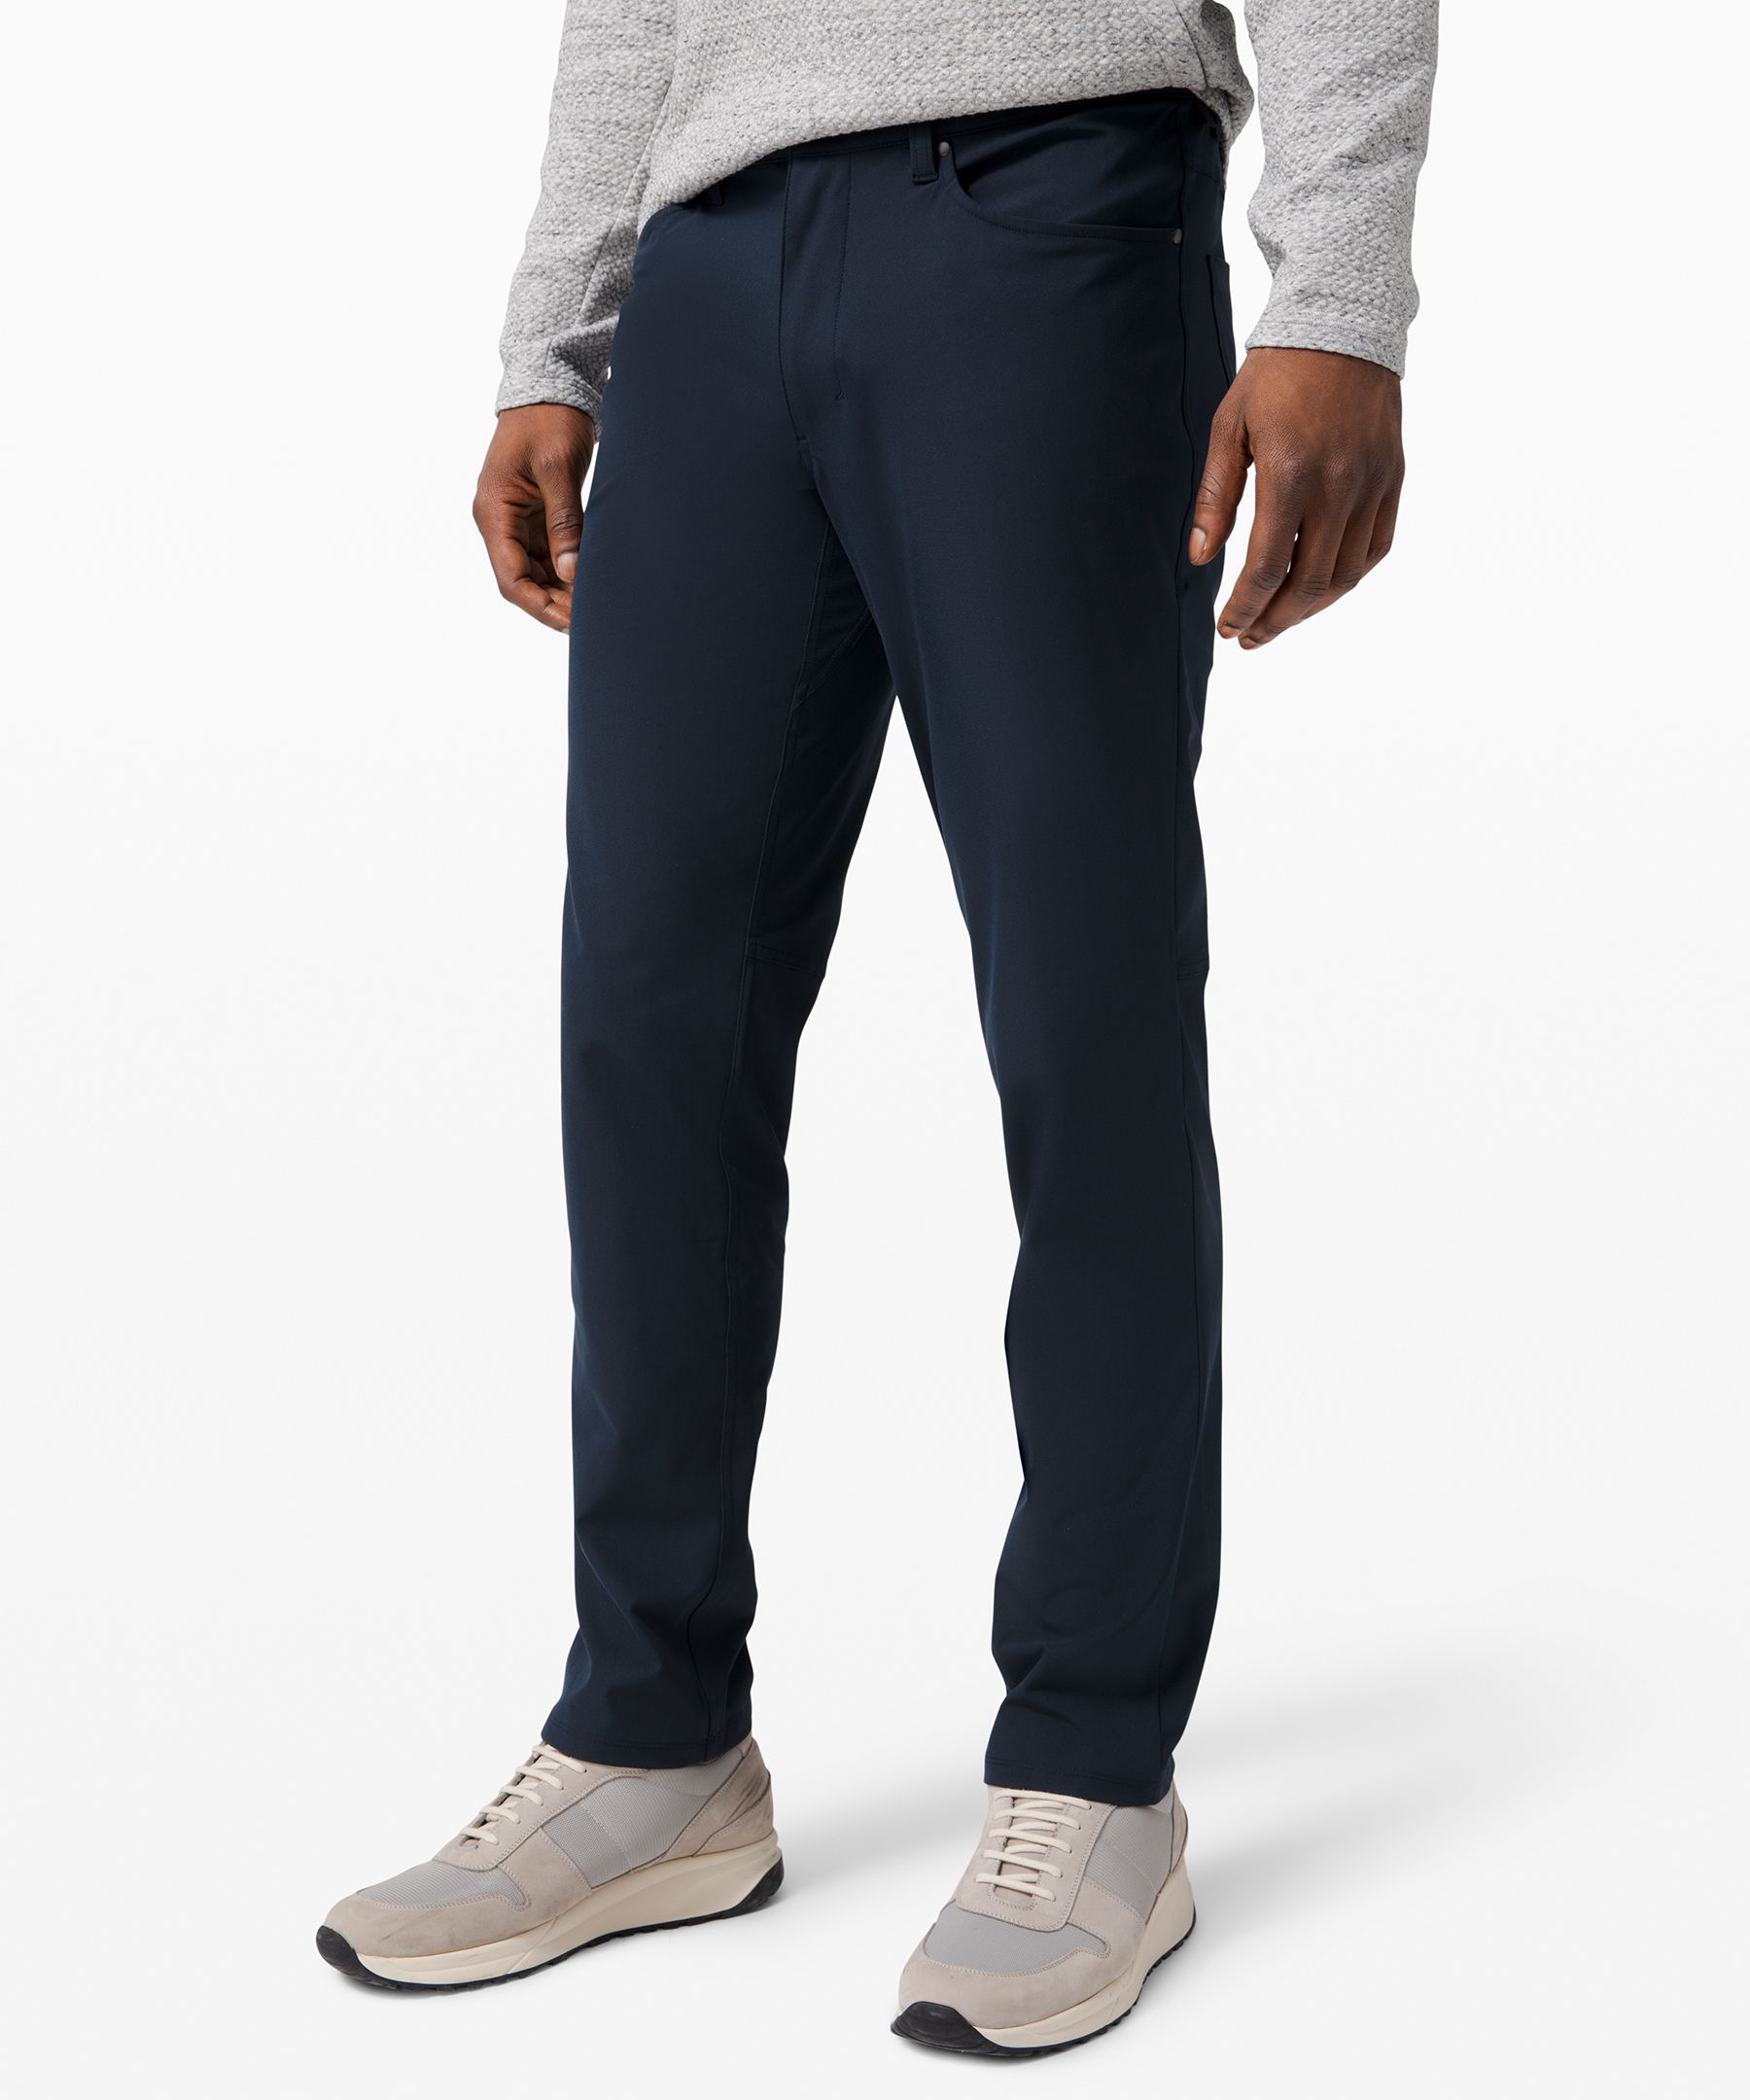 Lululemon Abc Pant Classic 30" *warpstreme Online Only In Navy